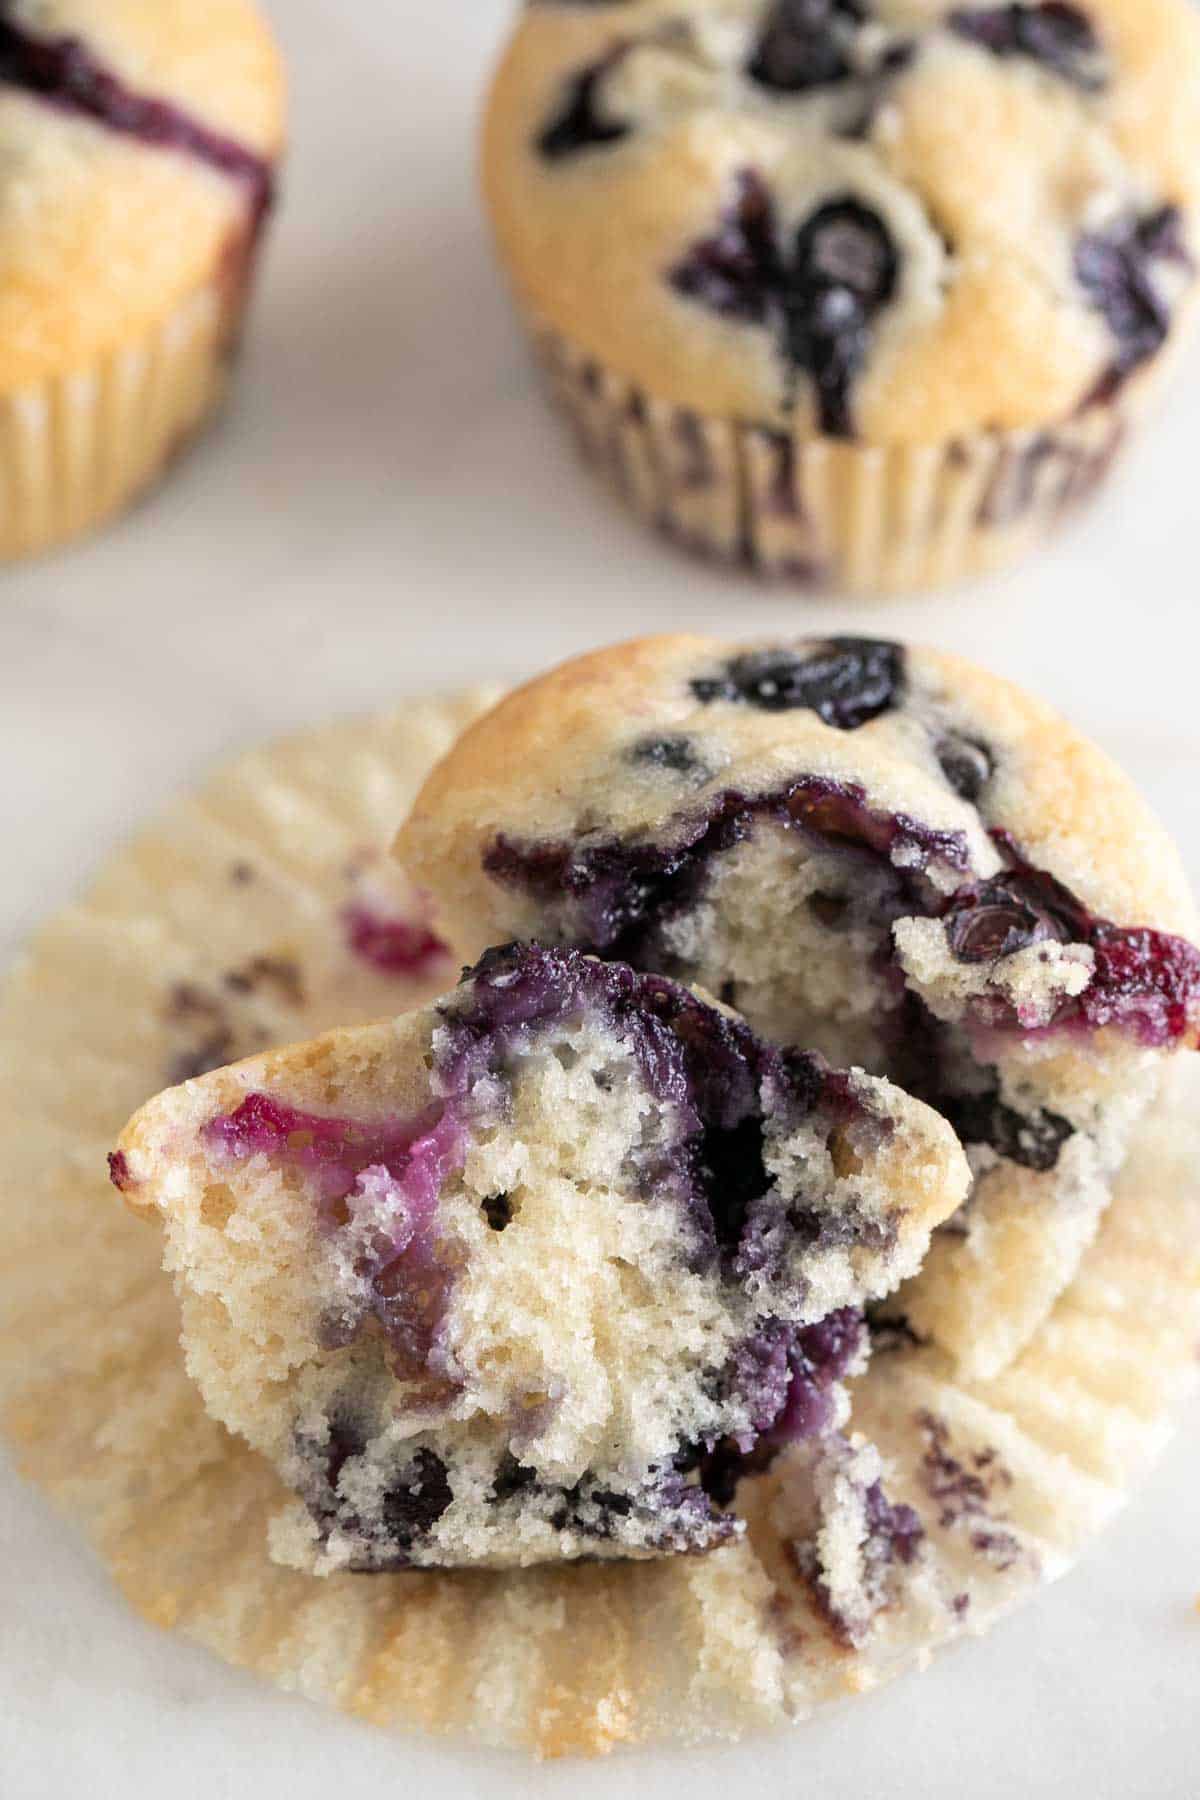 Vegan blueberry muffin, cut in half to reveal its moist and fruity interior.